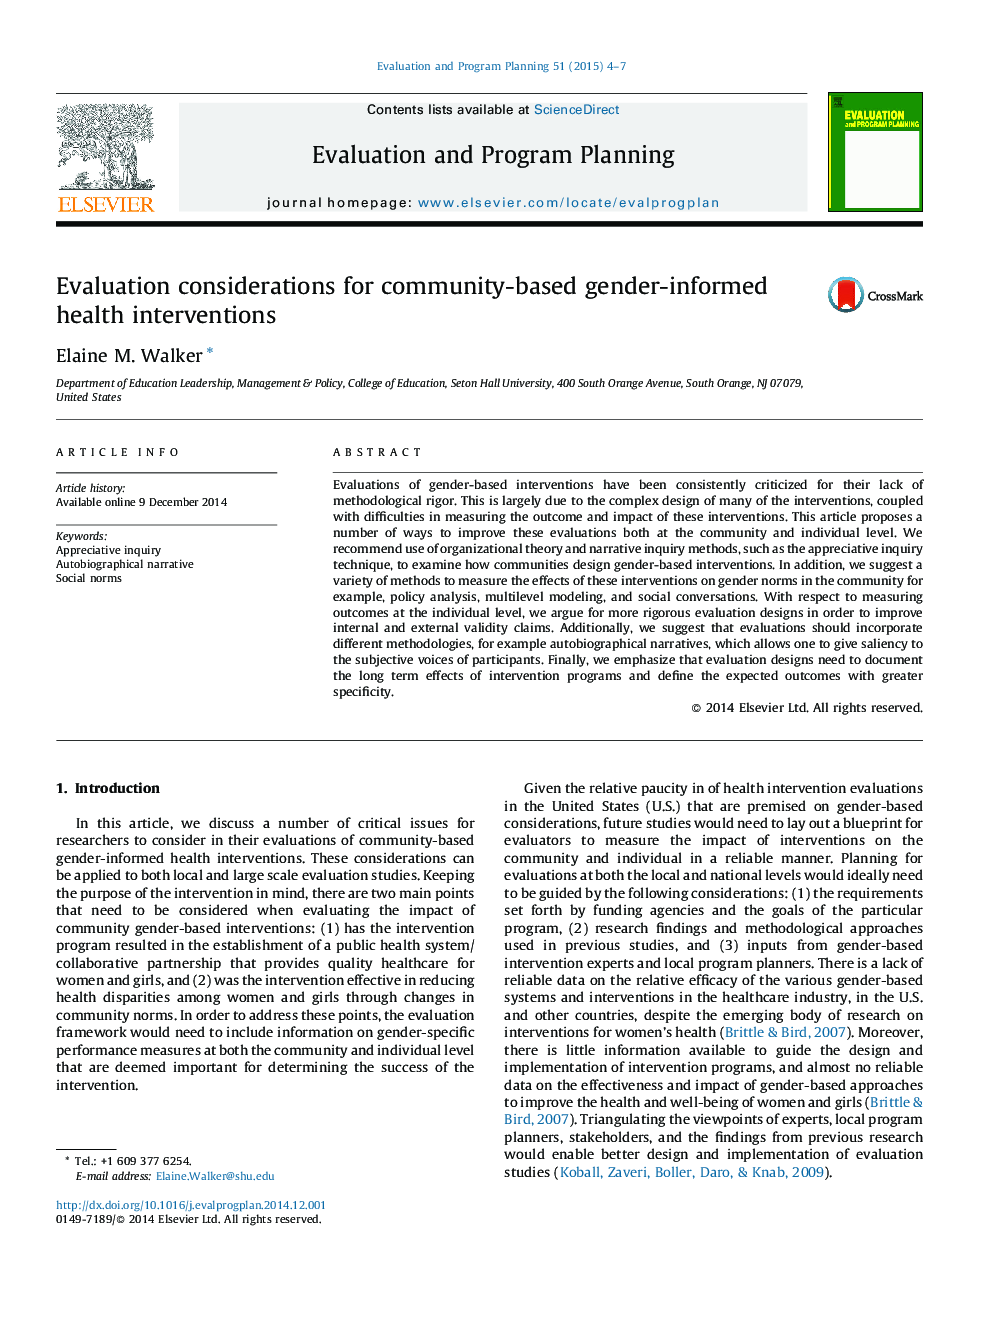 Evaluation considerations for community-based gender-informed health interventions